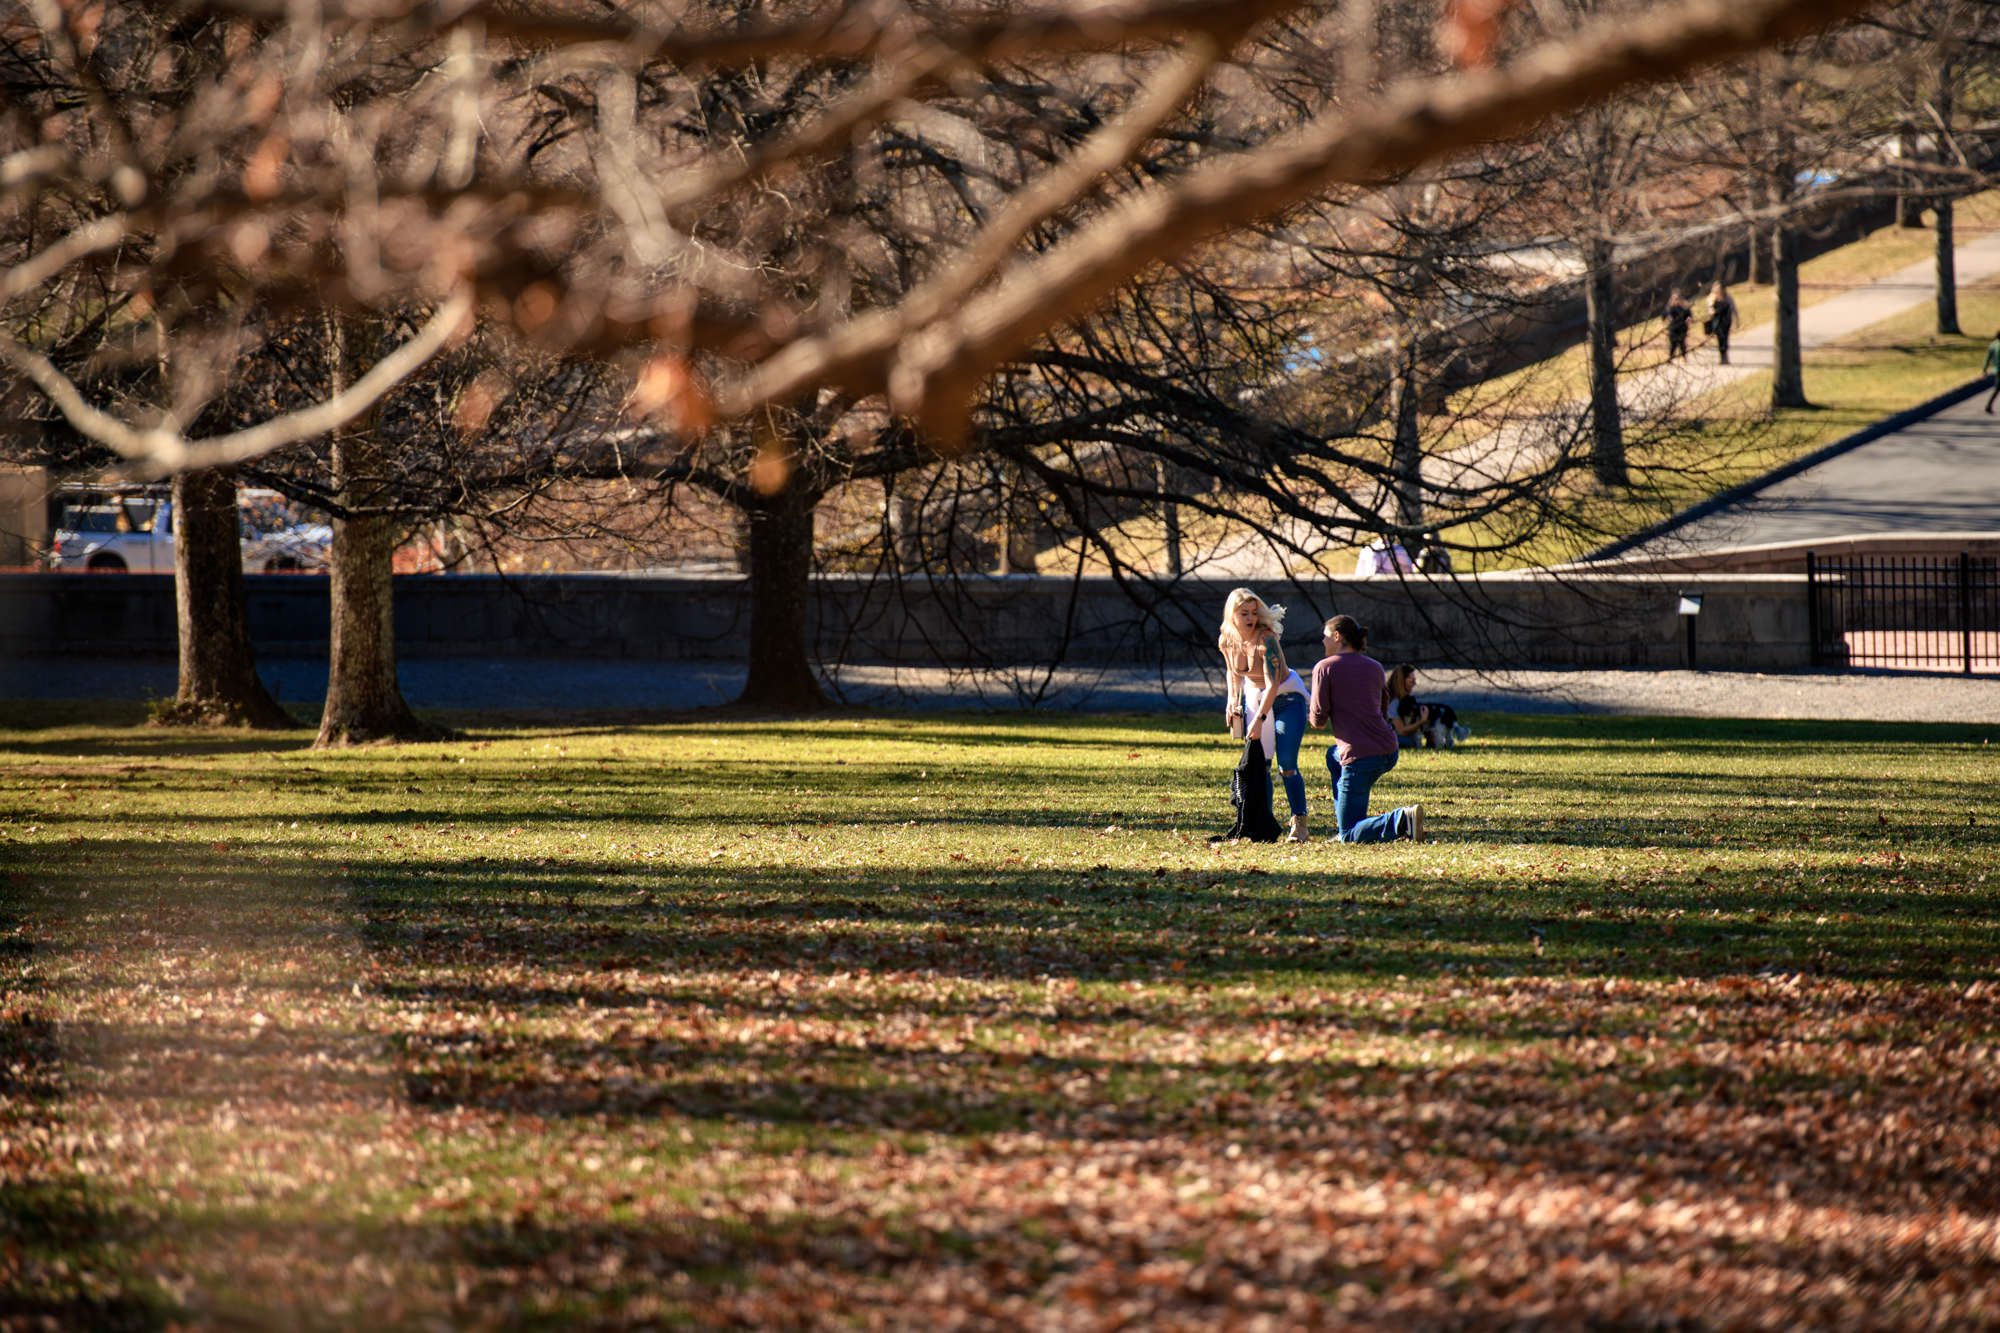 guy proposes to his girlfriend on the diana lawn at biltmore estate